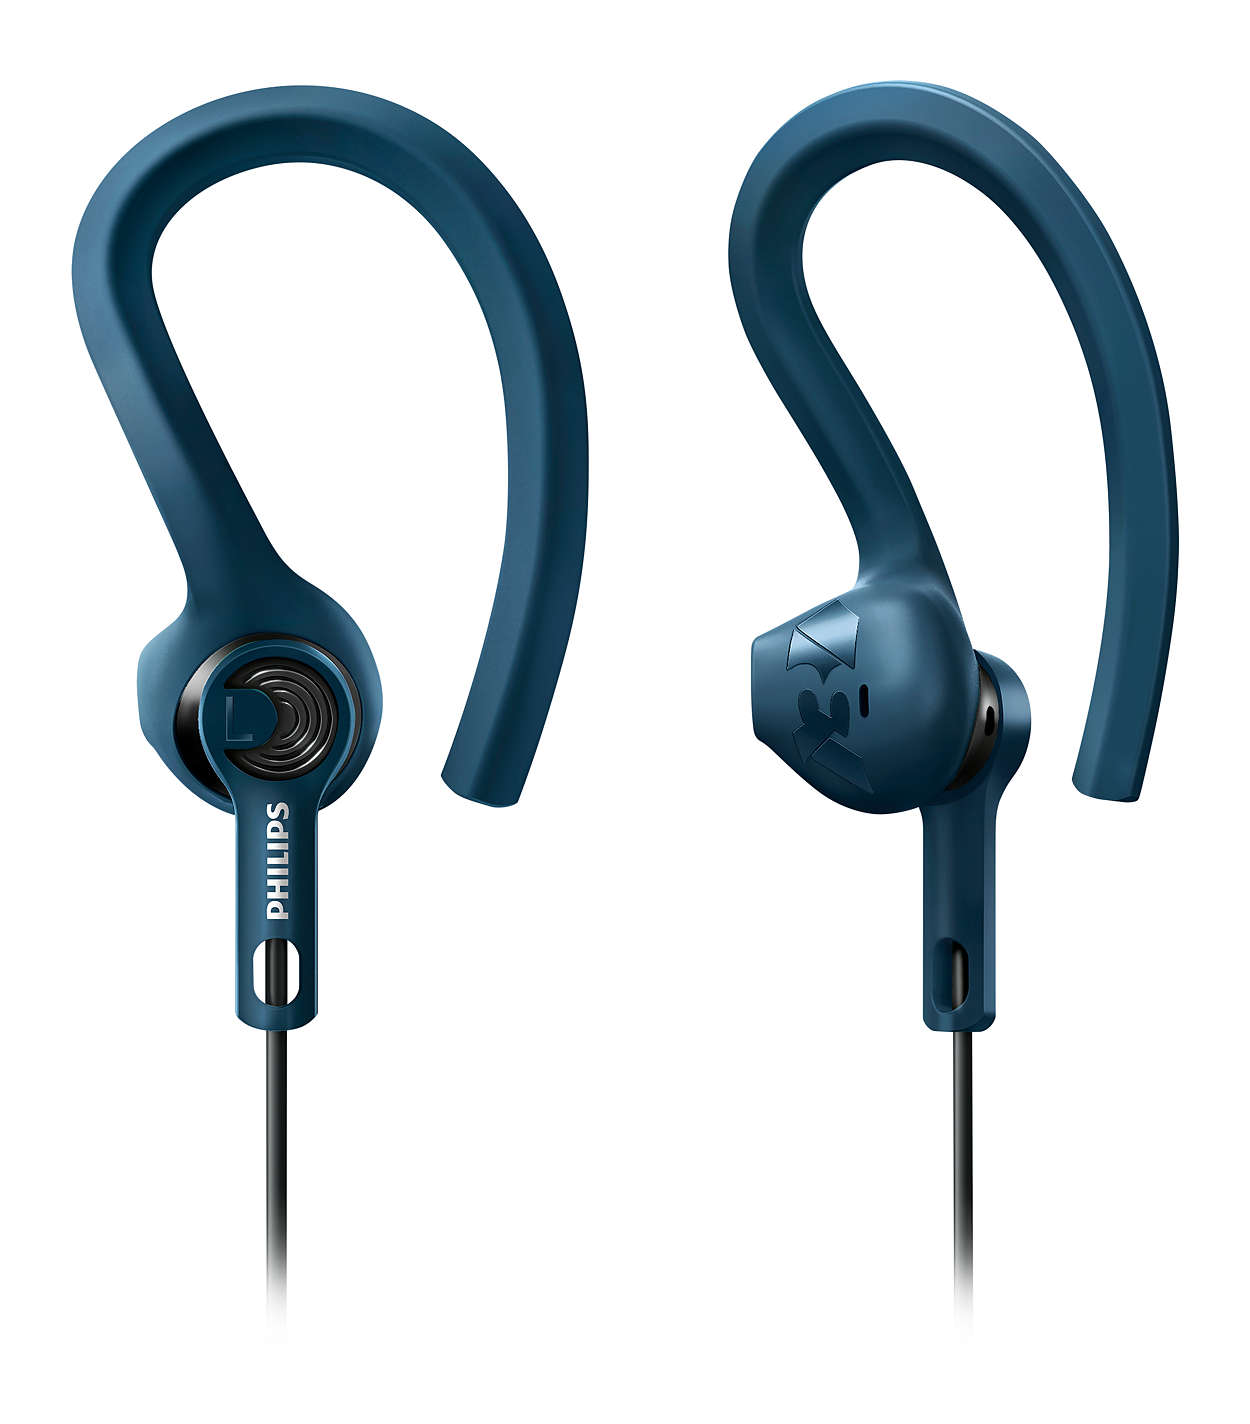 along morale Uplifted ActionFit Sports headphones SHQ1400BL/27 | Philips